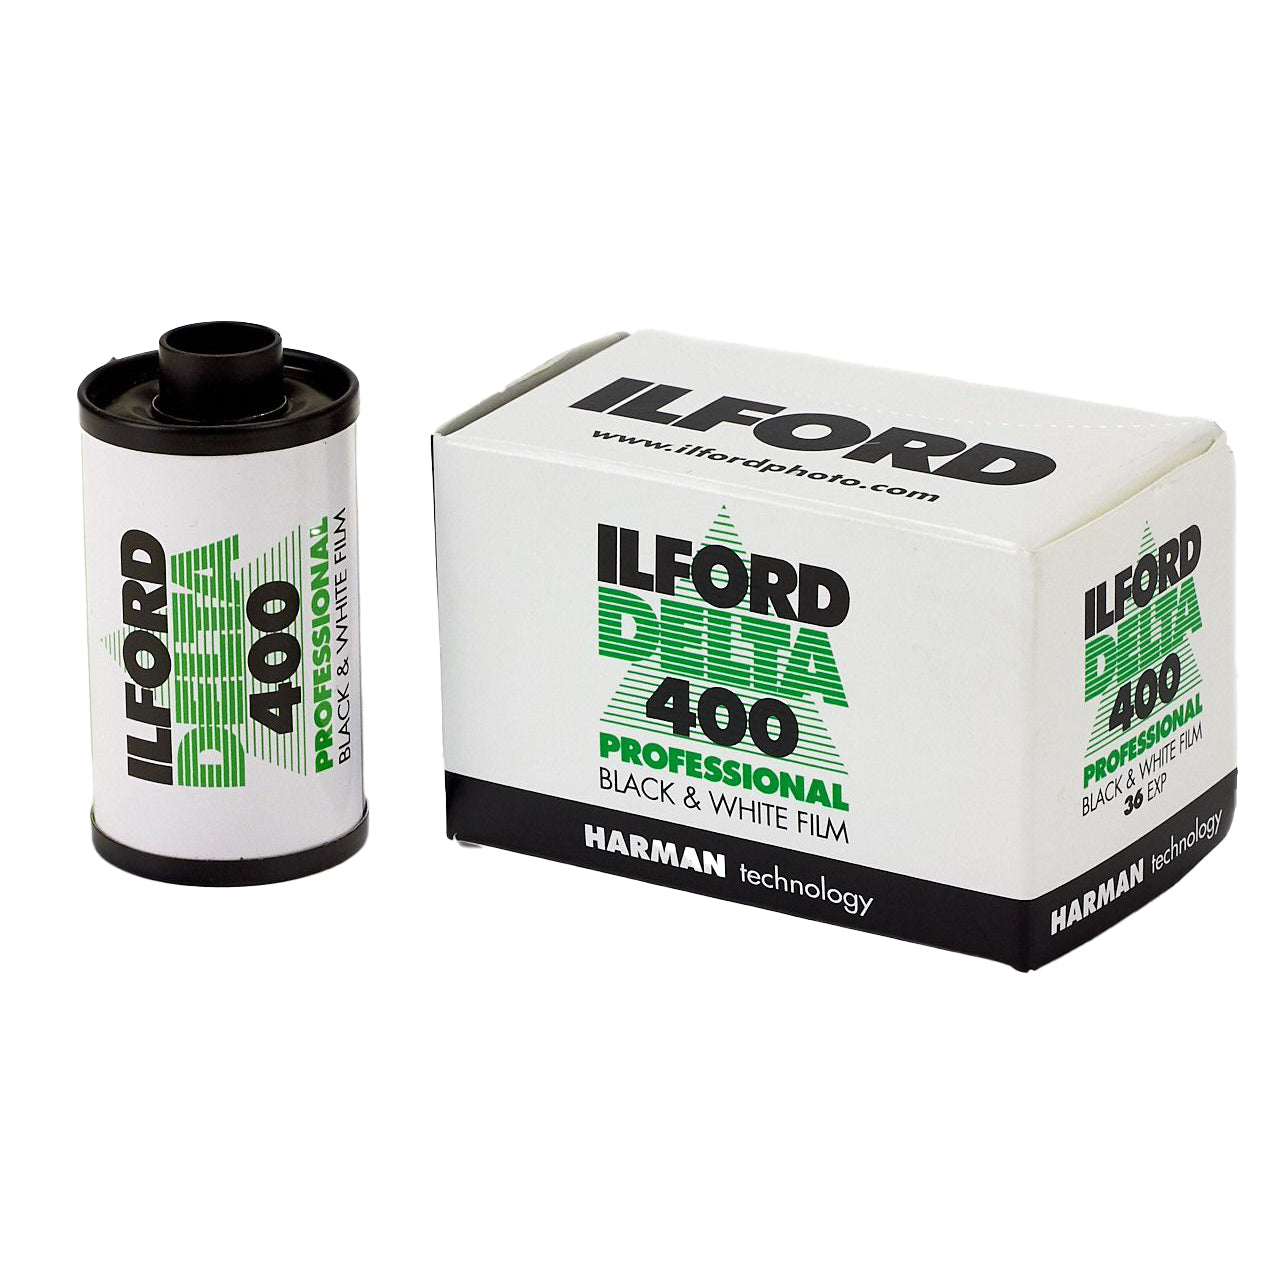 Product Image of Ilford Delta 400 Professional 35mm Black & White Film - 36 exp